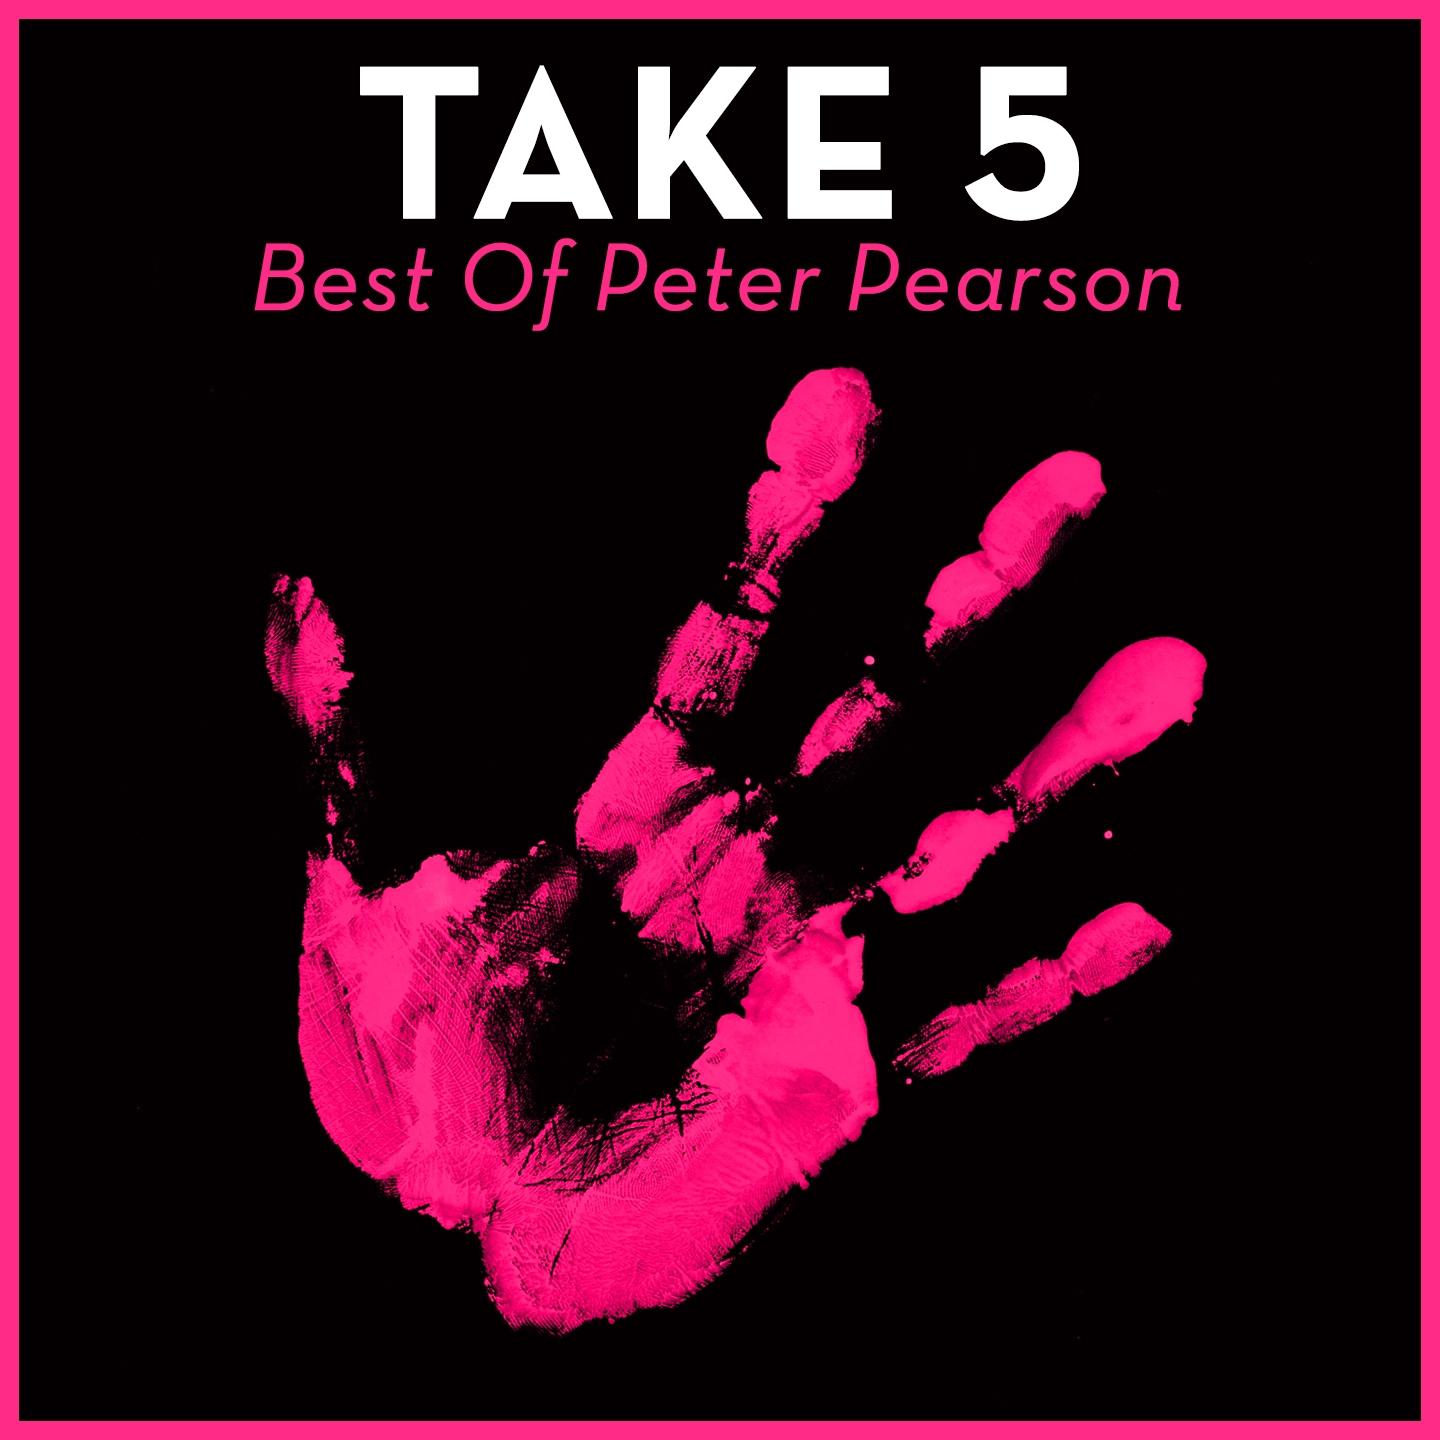 Take 5 - Best Of Peter Pearson